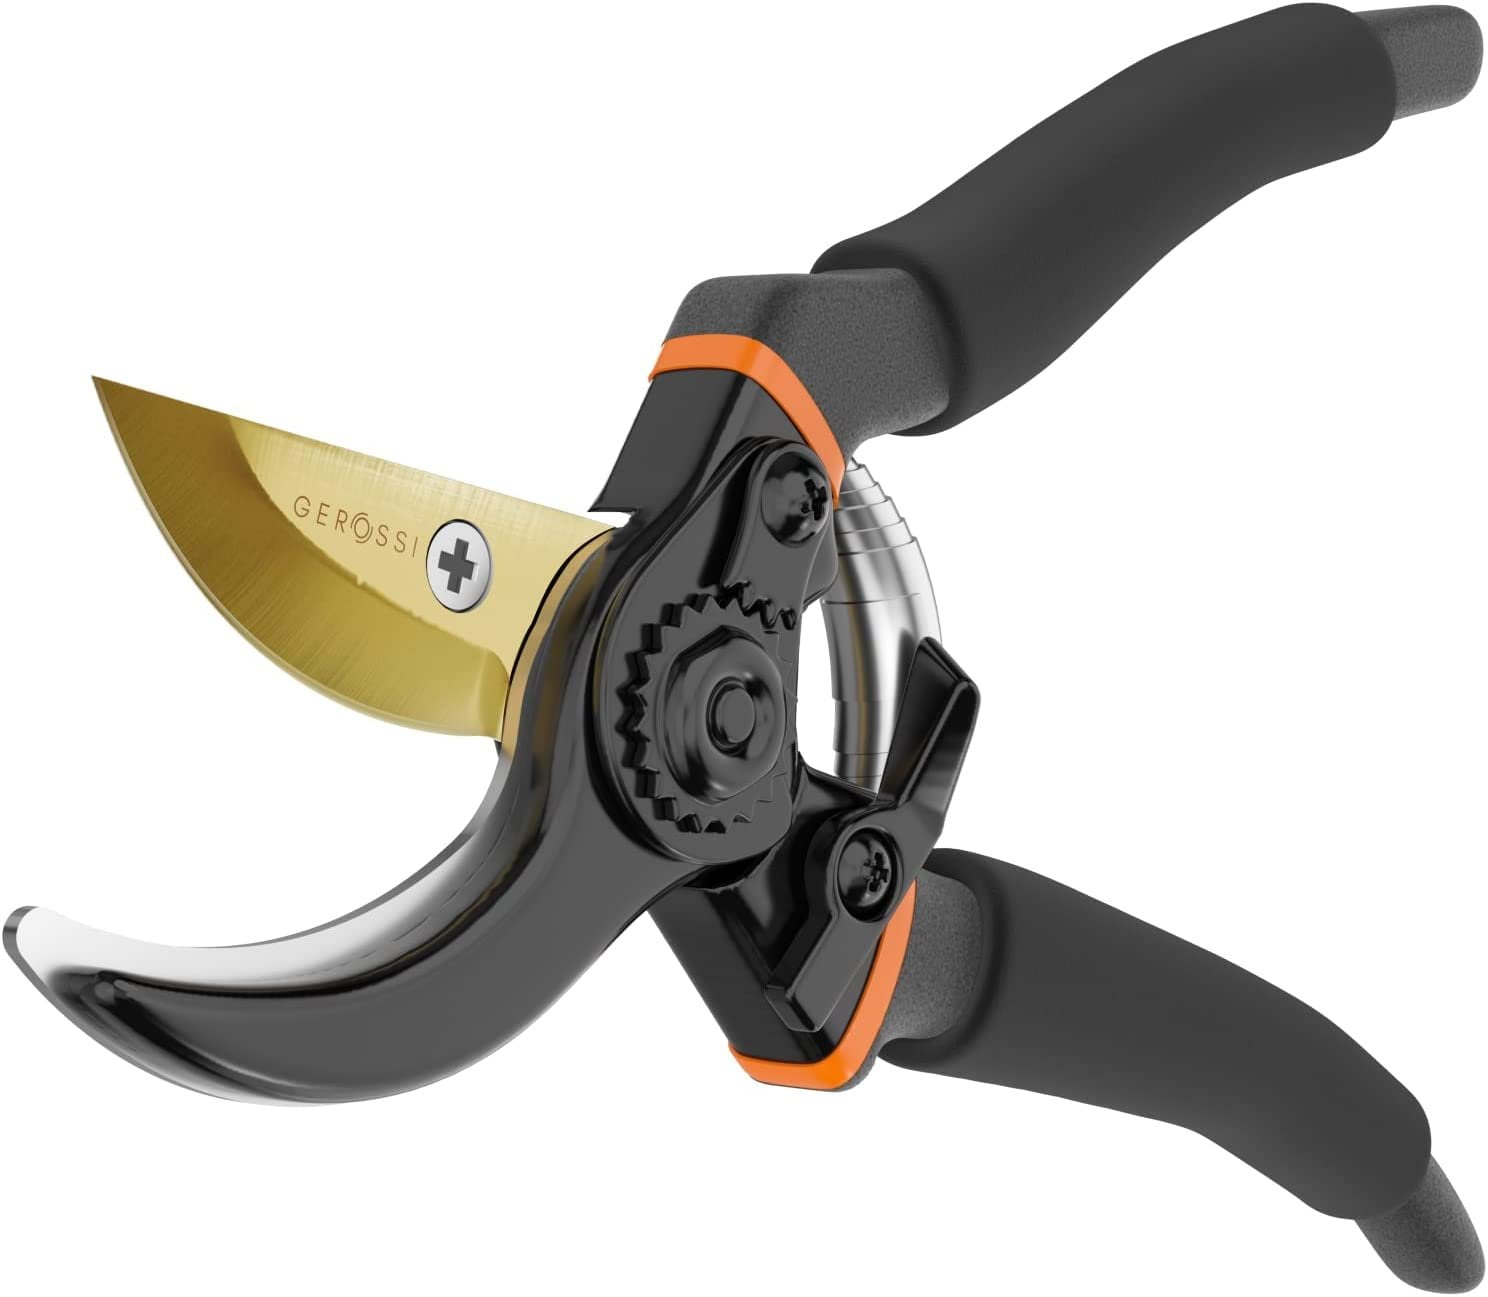 Haus & Garten ClassicPRO 8.5 Bypass Pruning Shears - Premium Garden Shears  - Use As Gardening Shears, Garden Clippers, Handheld Heavy-Duty  Professional Pruning…